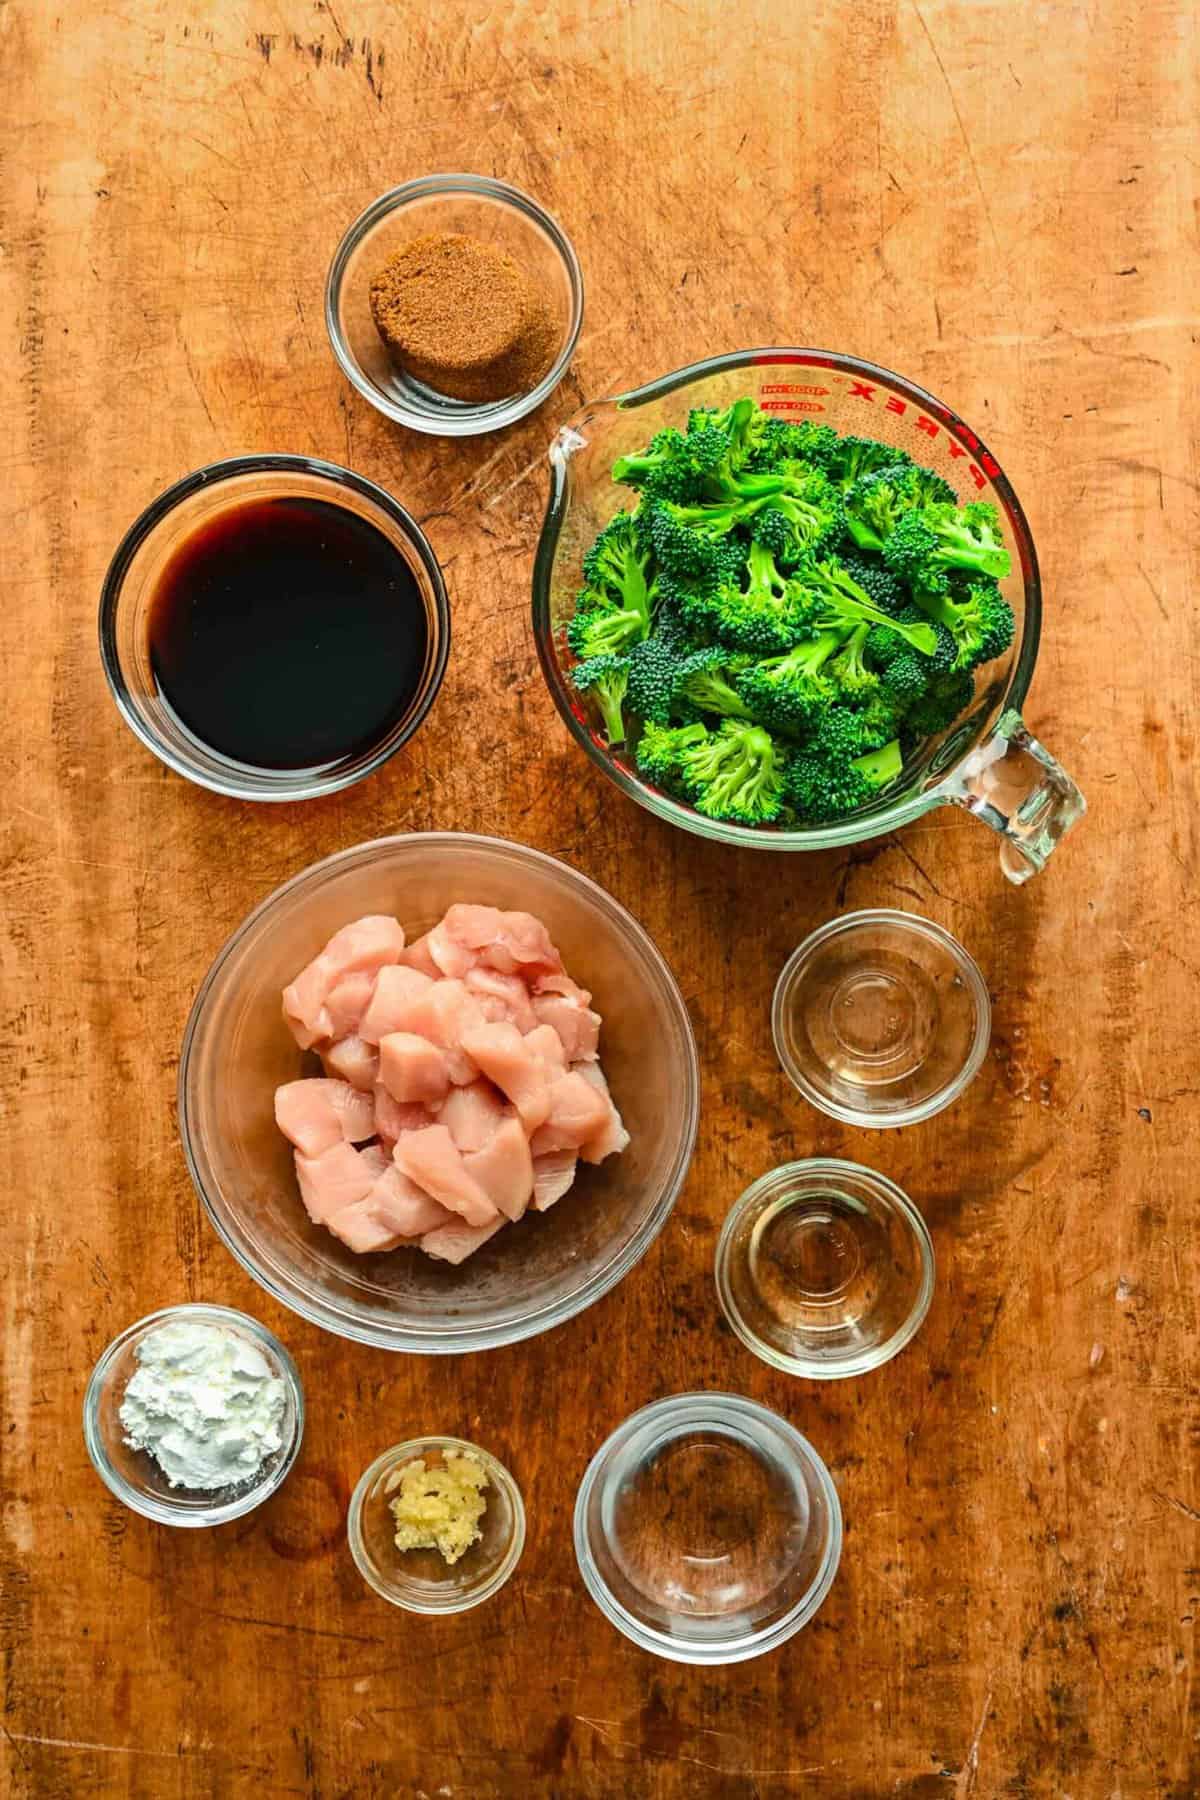 The ingredients for chicken and broccoli.